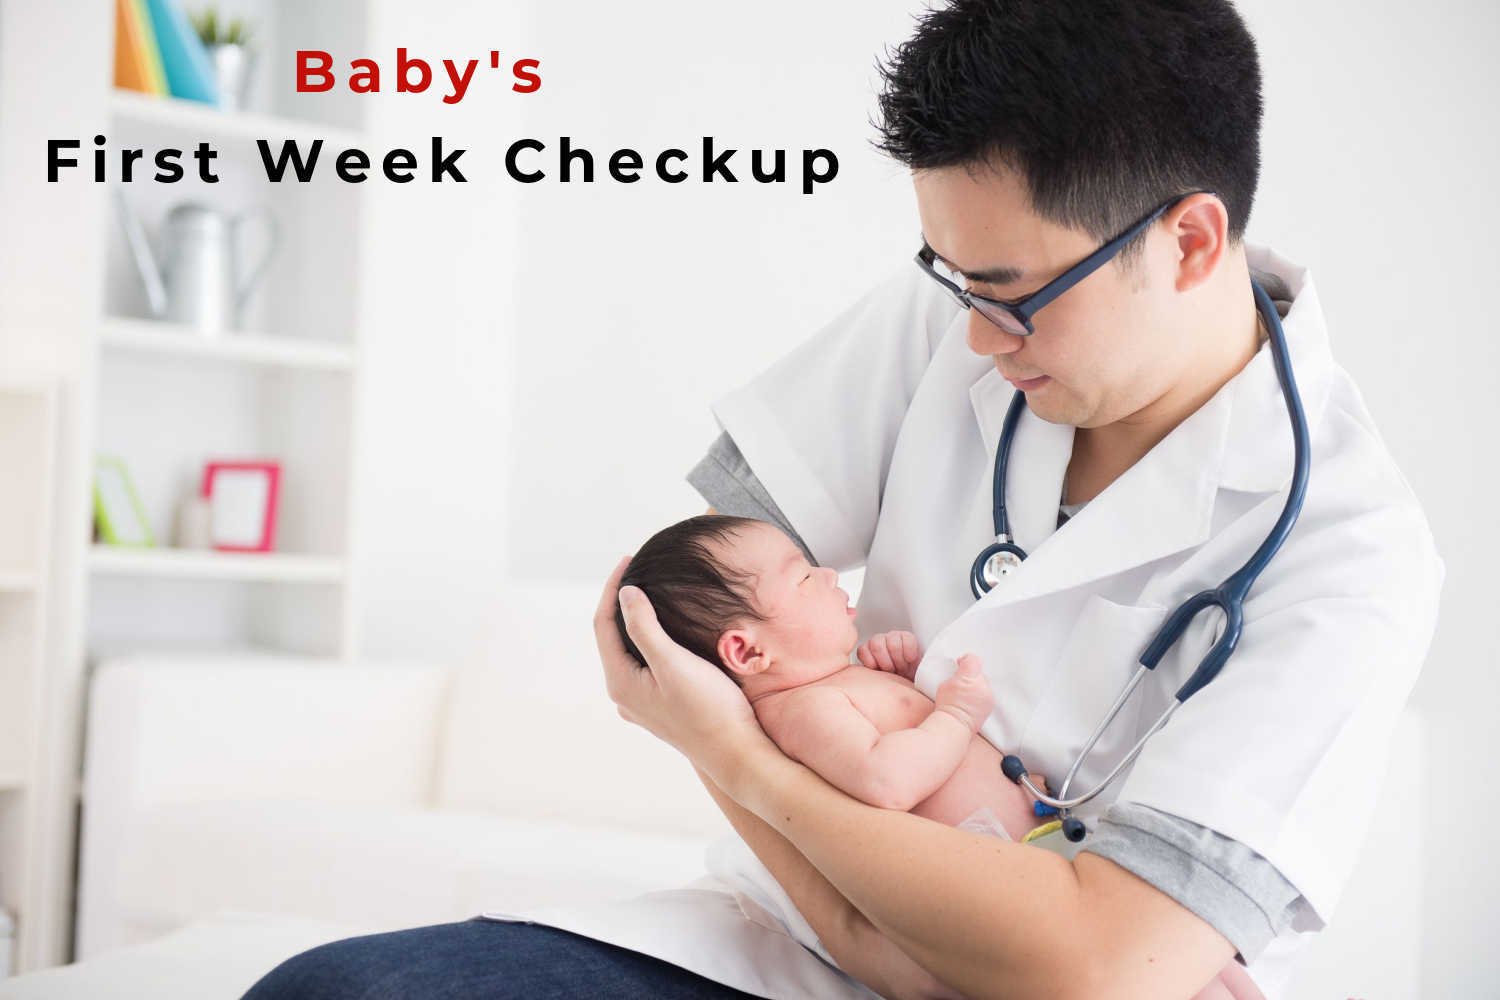 Baby’s First Week Checkup